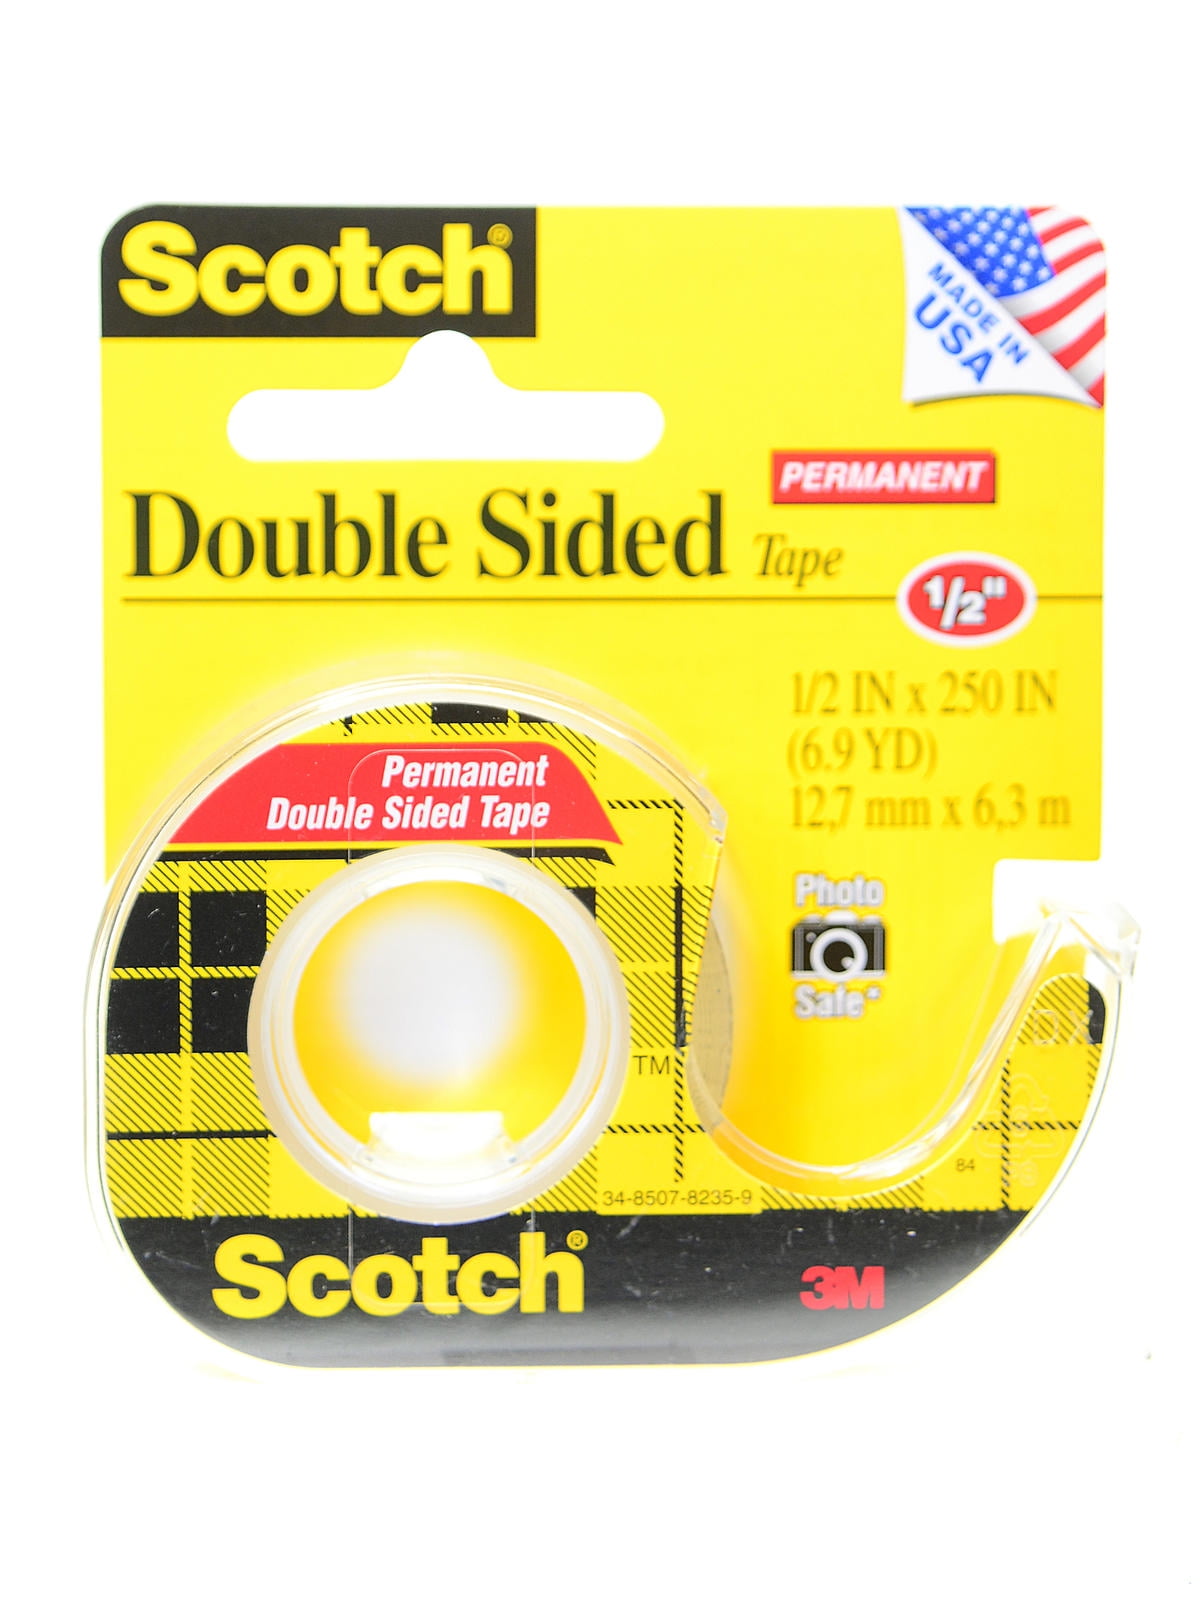 6 Pack Double Sided Tape Roller, Scrapbooking Tape